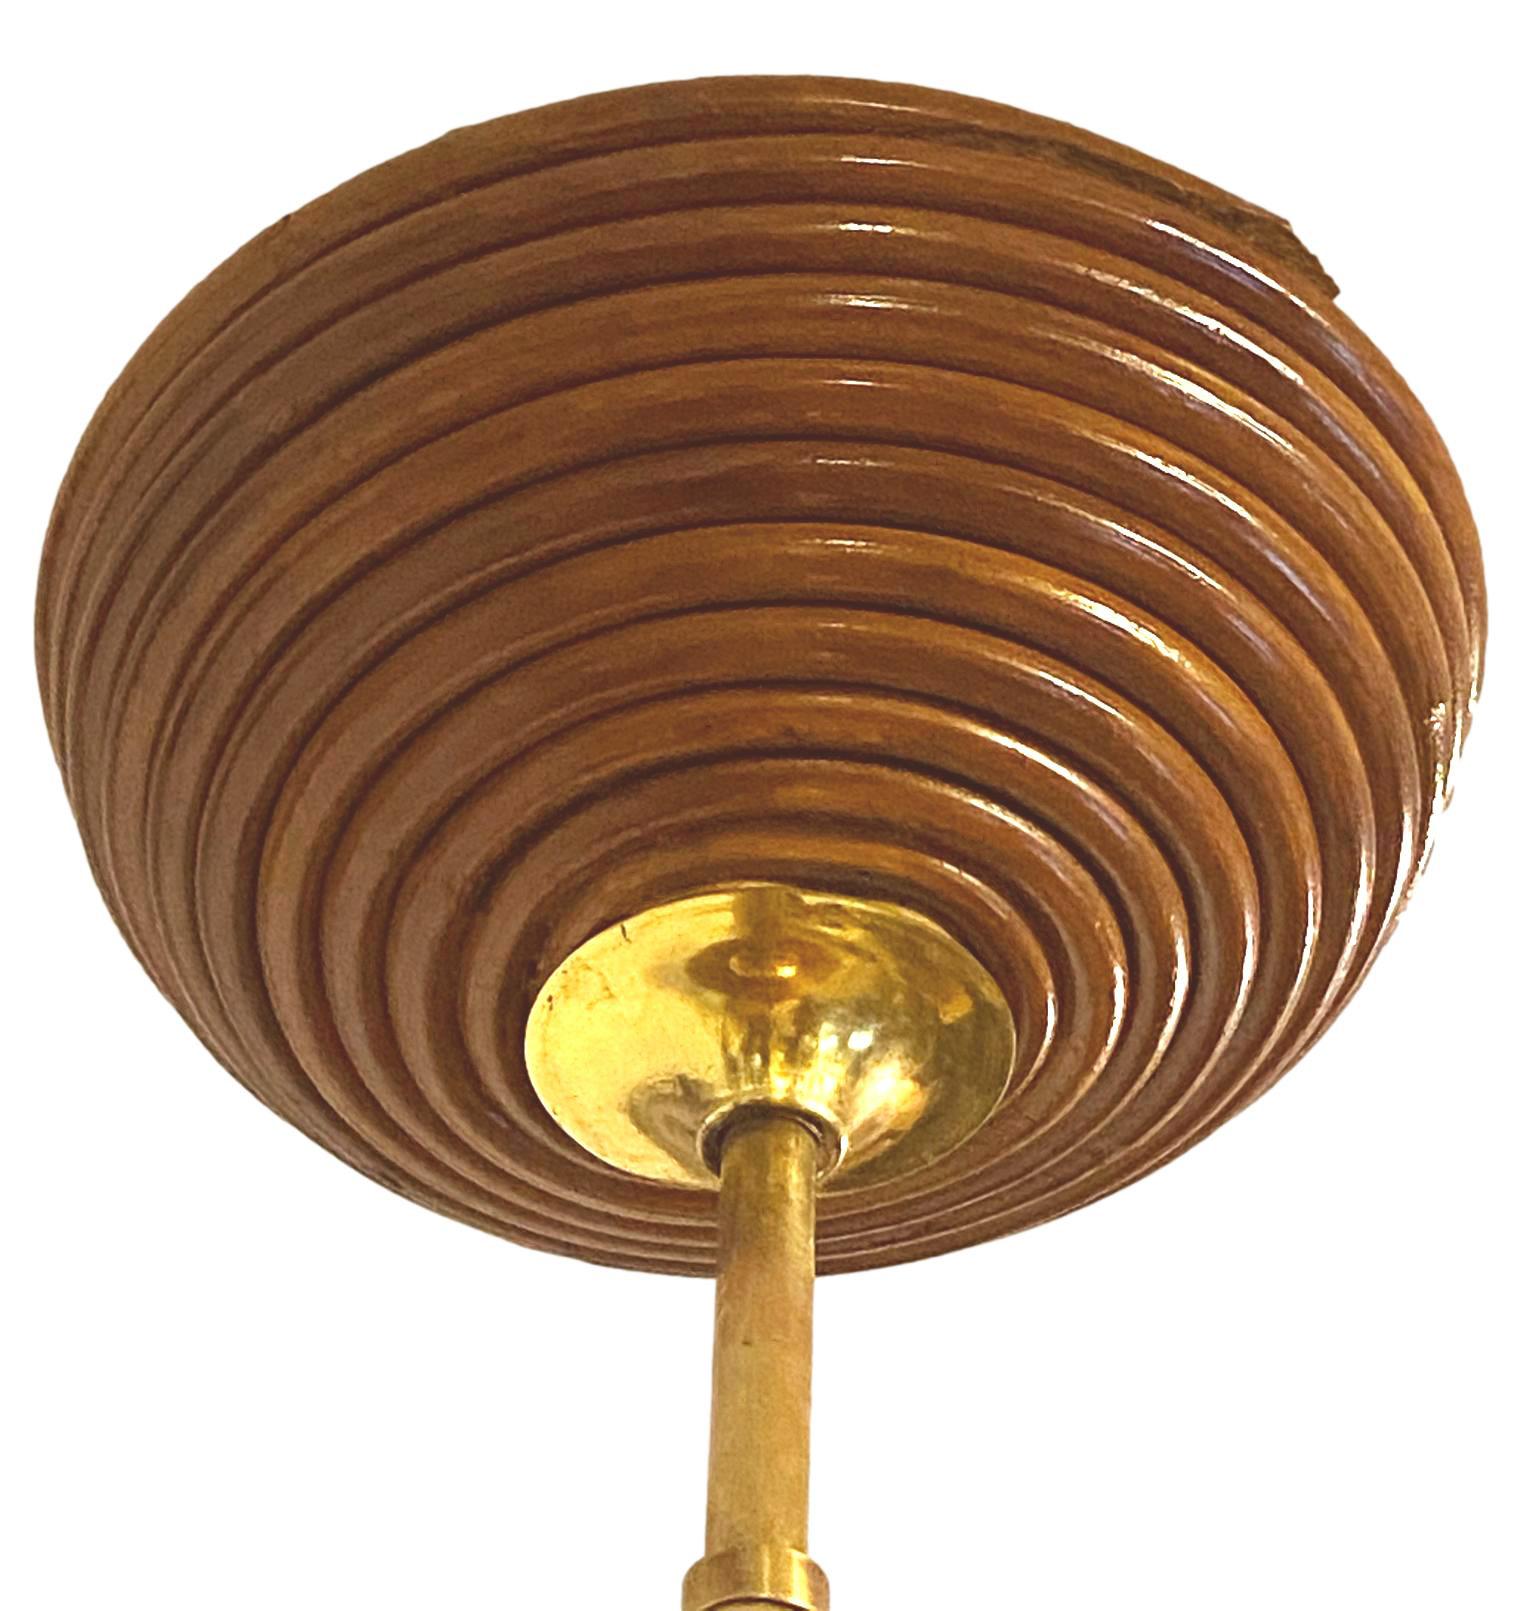 Mushroom-shaped pendant lamp in rattan, pencil barrel and brass, Italy, 1960s. The domed lampshade is suspended on a rattan chain topped with brass inserts. Excellent condition.